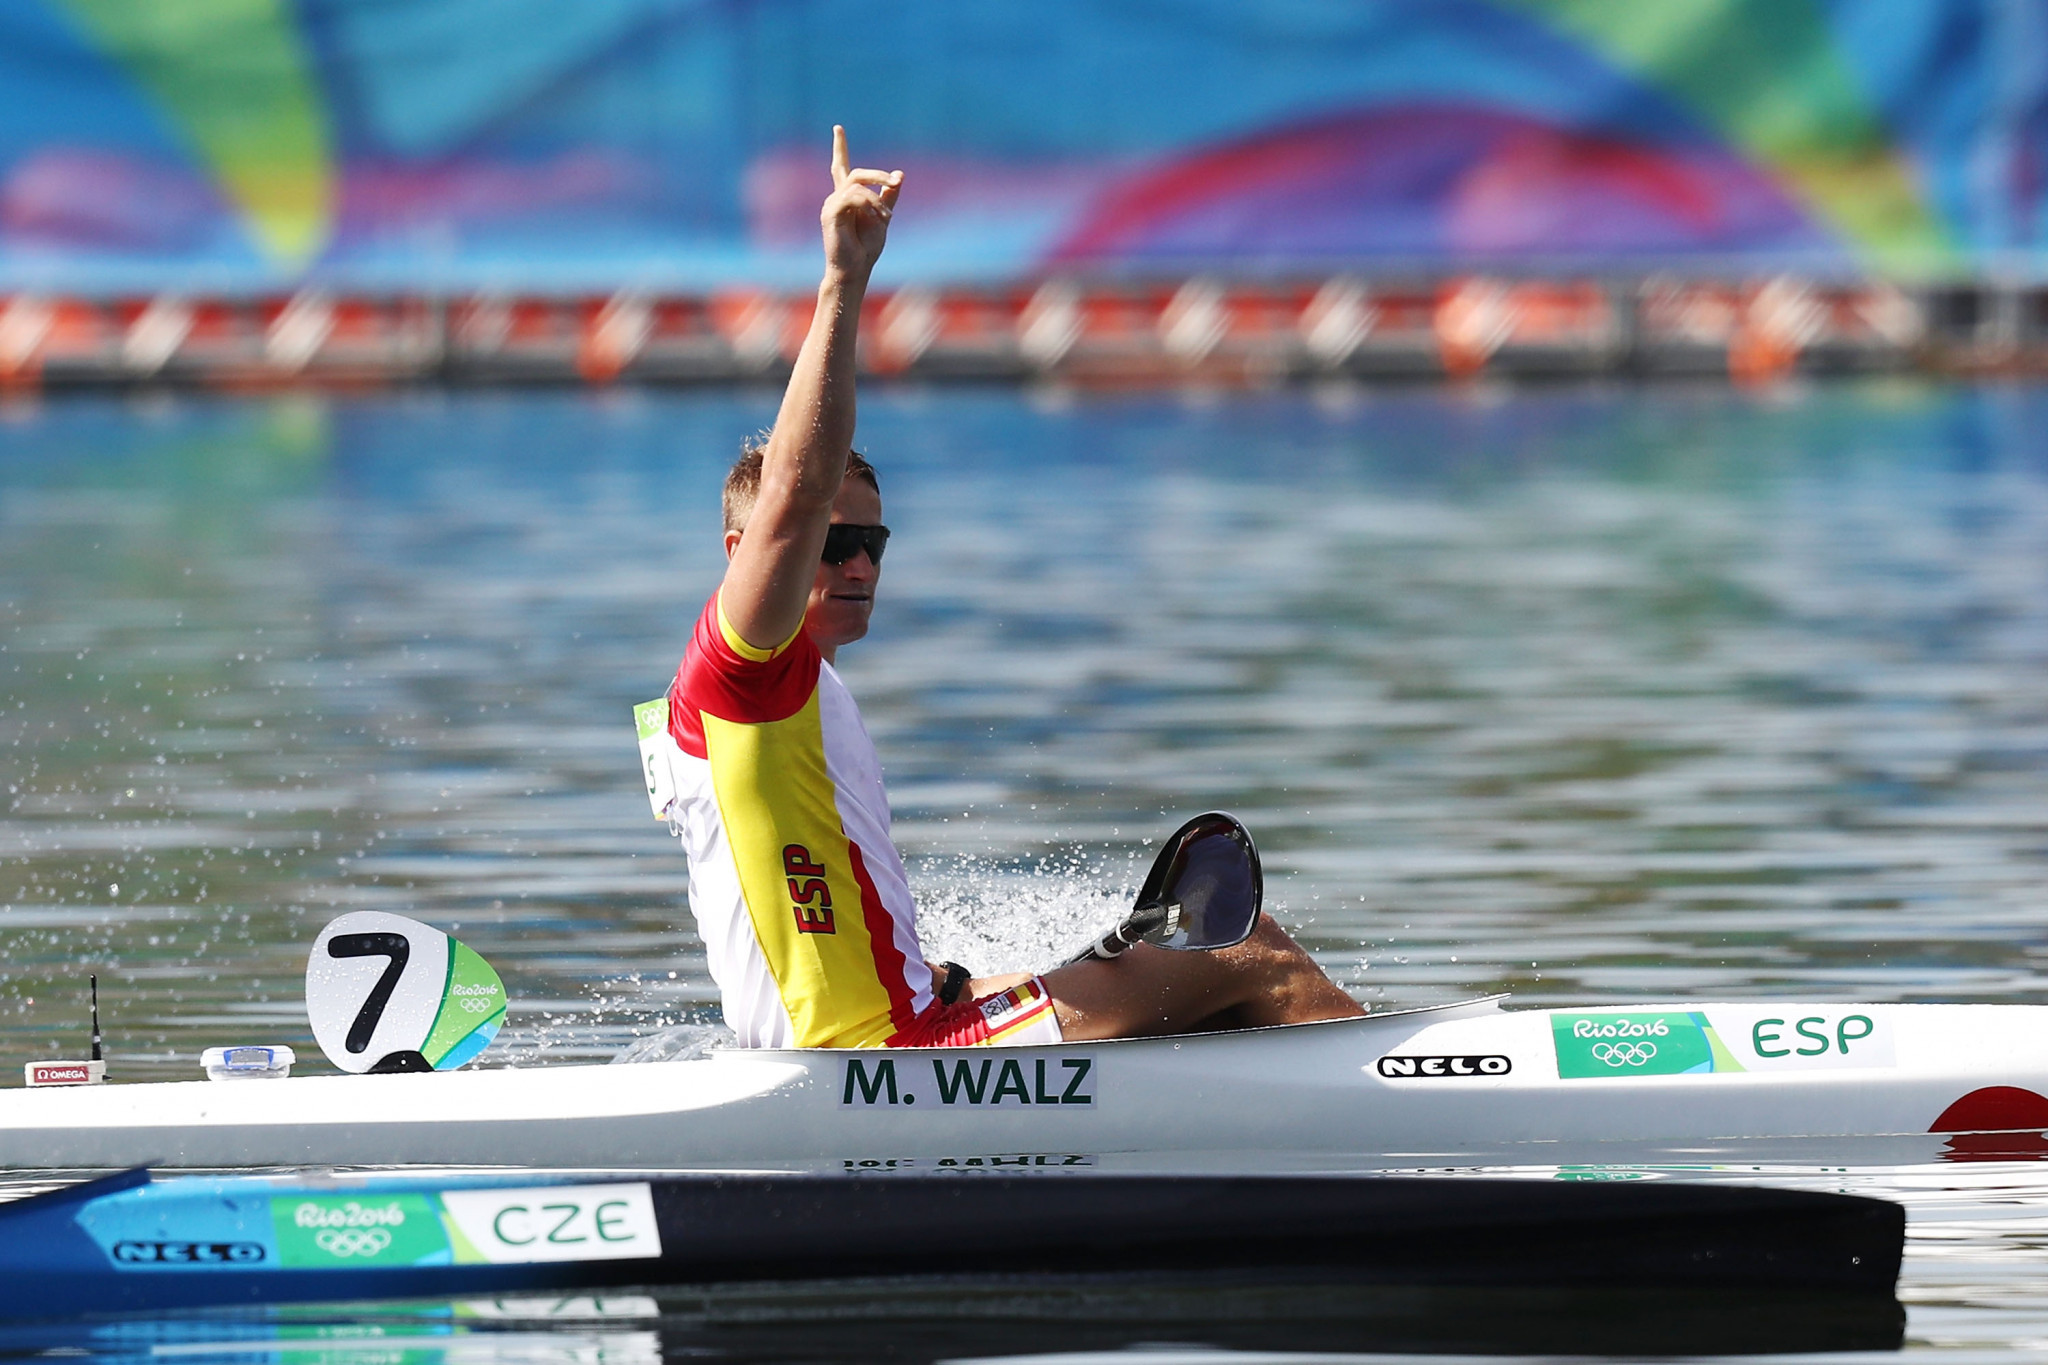 Spain win C2 and K2 races at Canoe Sprint World Cup in Szeged